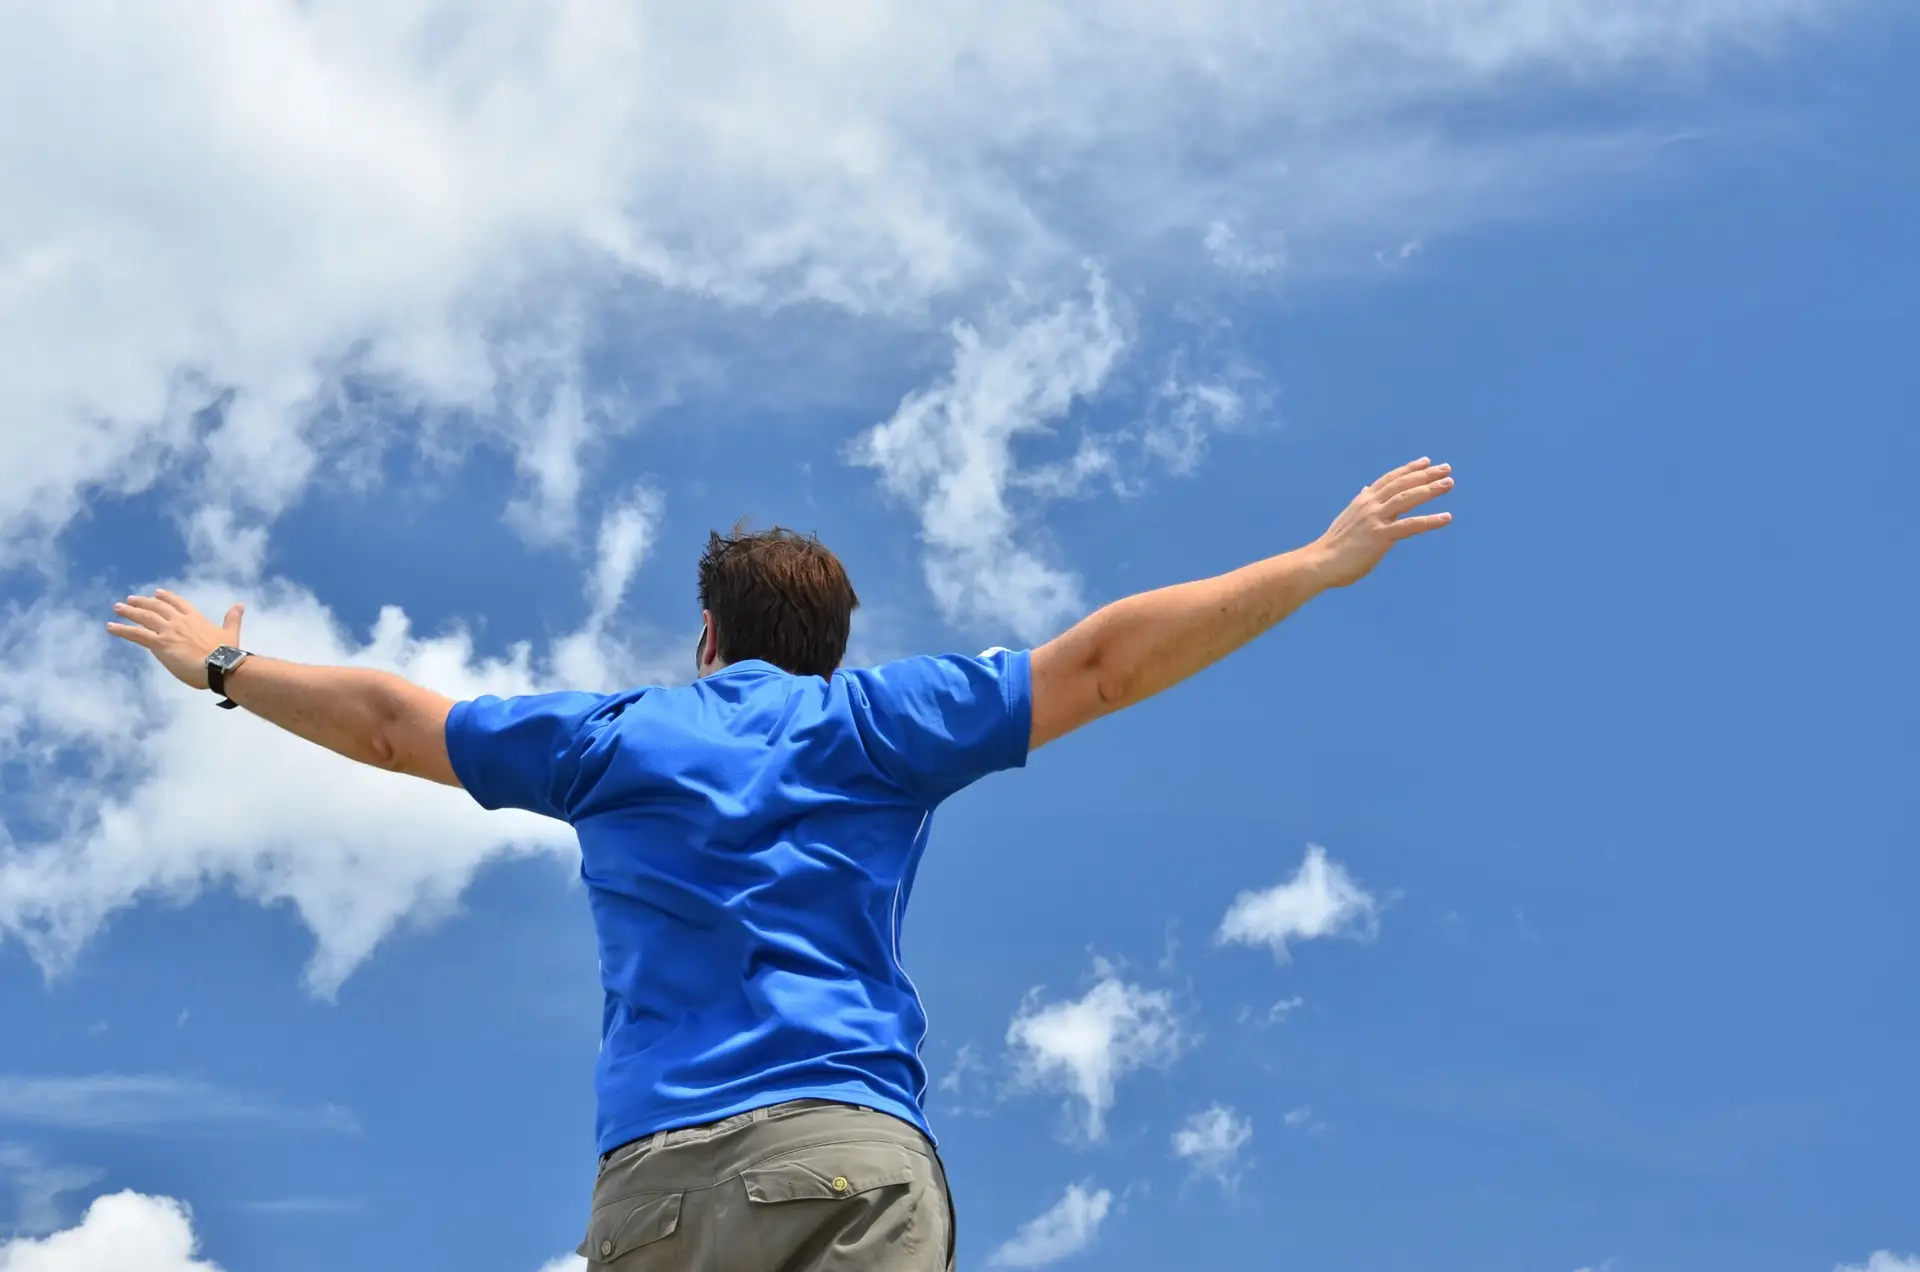 Man in blue shirt on blue sky with white clouds